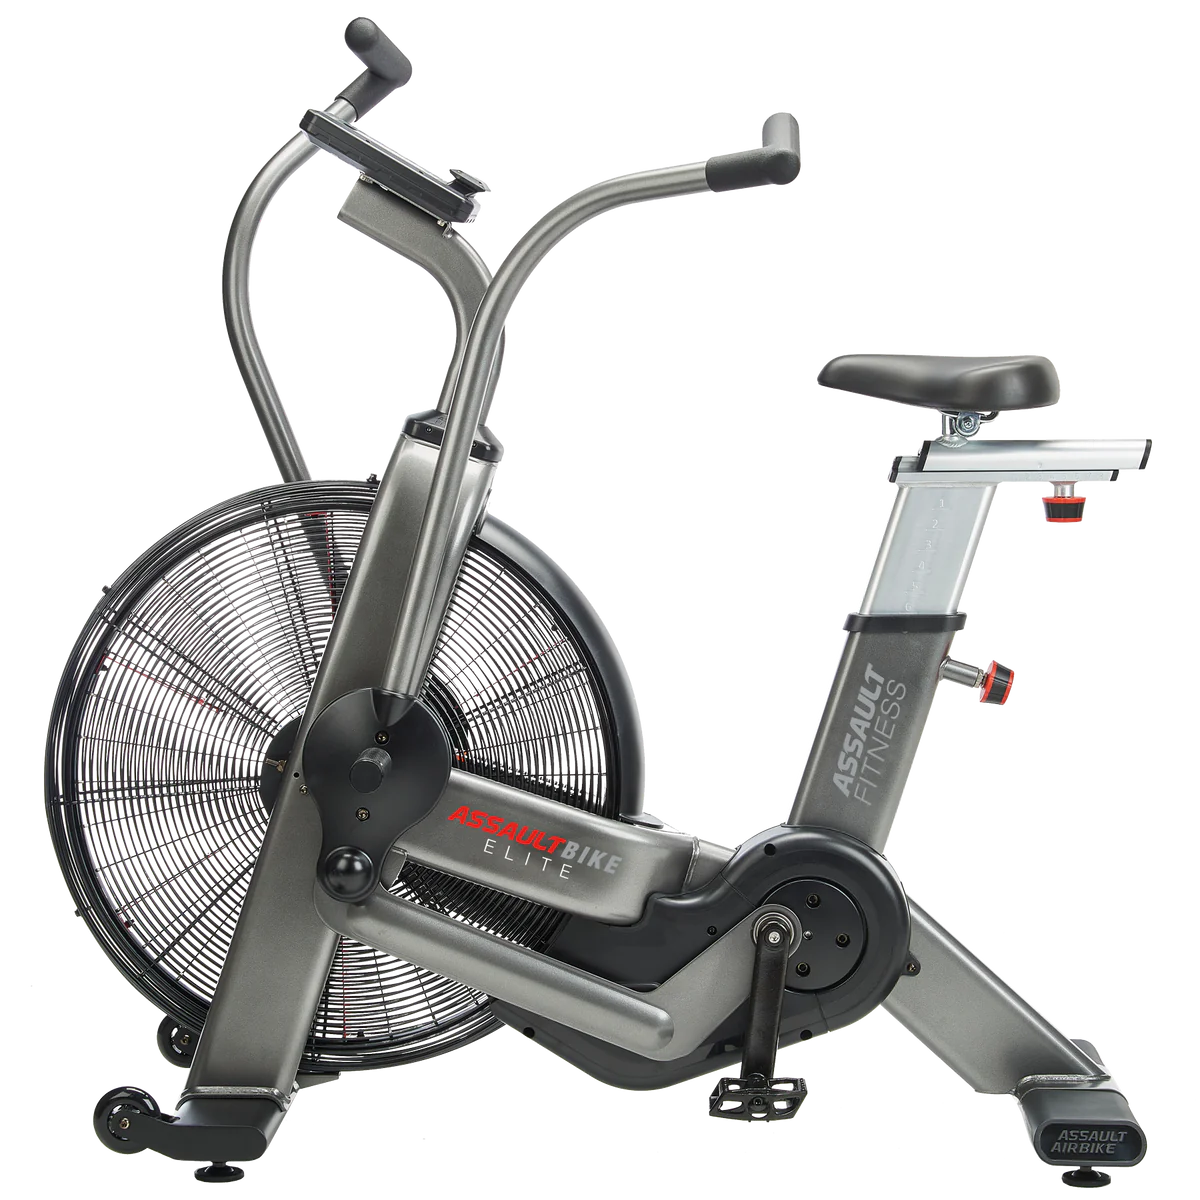 Ideal for Interval Training